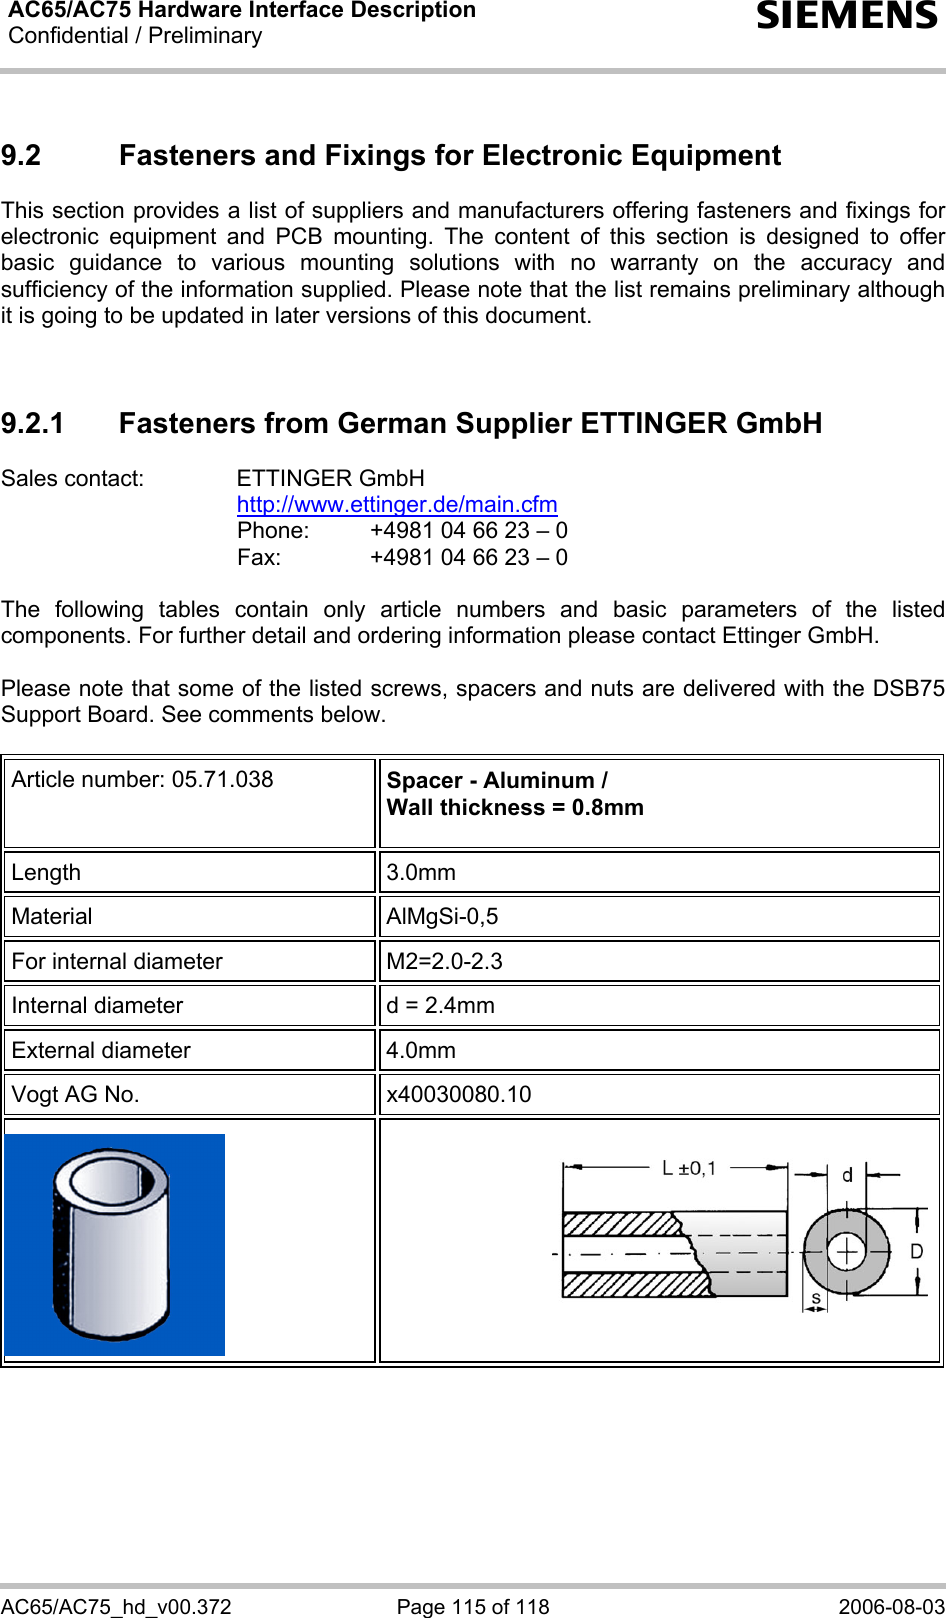 AC65/AC75 Hardware Interface Description Confidential / Preliminary  s AC65/AC75_hd_v00.372  Page 115 of 118  2006-08-03 9.2  Fasteners and Fixings for Electronic Equipment This section provides a list of suppliers and manufacturers offering fasteners and fixings for electronic equipment and PCB mounting. The content of this section is designed to offer basic guidance to various mounting solutions with no warranty on the accuracy and sufficiency of the information supplied. Please note that the list remains preliminary although it is going to be updated in later versions of this document.   9.2.1  Fasteners from German Supplier ETTINGER GmbH Sales contact:  ETTINGER GmbH  http://www.ettinger.de/main.cfm   Phone:   +4981 04 66 23 – 0   Fax:    +4981 04 66 23 – 0  The following tables contain only article numbers and basic parameters of the listed components. For further detail and ordering information please contact Ettinger GmbH.   Please note that some of the listed screws, spacers and nuts are delivered with the DSB75 Support Board. See comments below.  Article number: 05.71.038  Spacer - Aluminum / Wall thickness = 0.8mm  Length 3.0mm Material AlMgSi-0,5 For internal diameter  M2=2.0-2.3  Internal diameter  d = 2.4mm External diameter  4.0mm Vogt AG No.  x40030080.10      